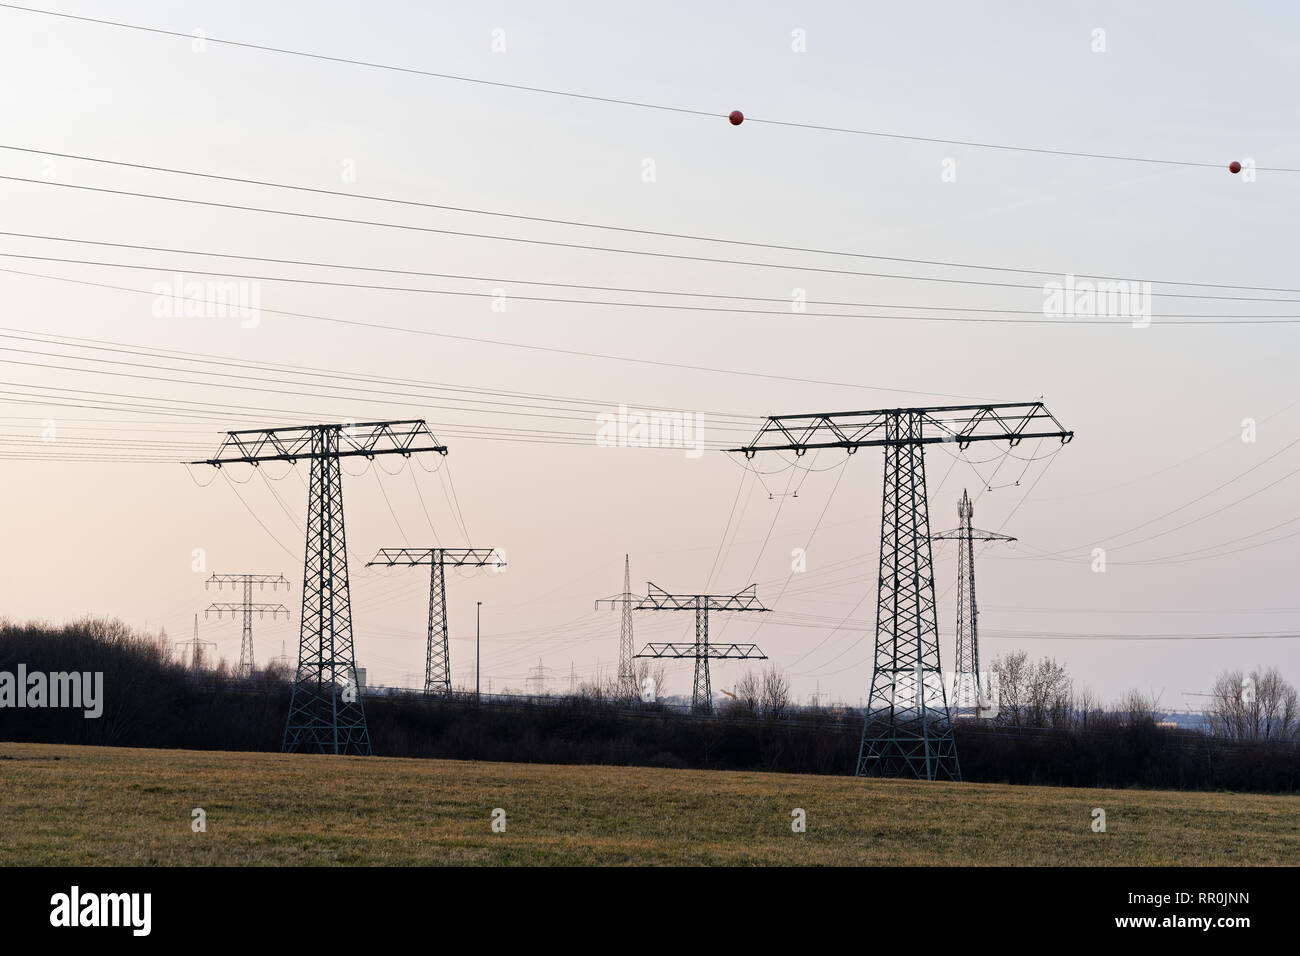 Large collection of electricity pylons in different types with cables, they stand staggered as silhouettes in front of a slightly colored evening sky  Stock Photo